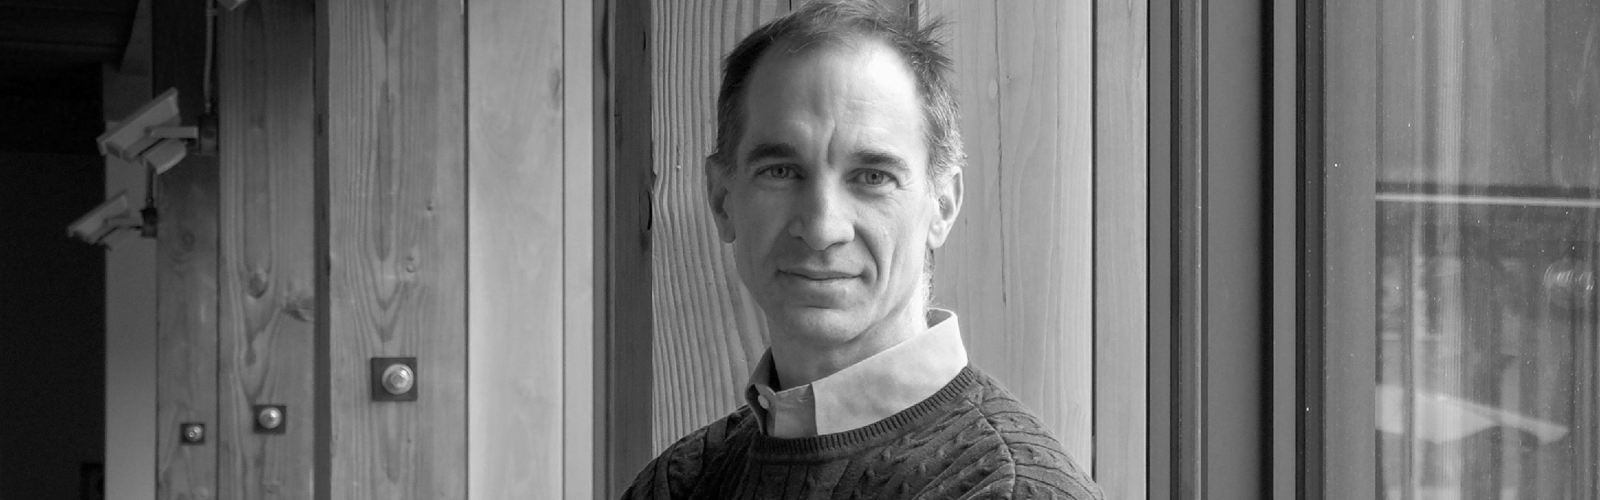 Black and white photo of Philip Oreopoulos, Professor of Economics and Public Policy at the University of Toronto